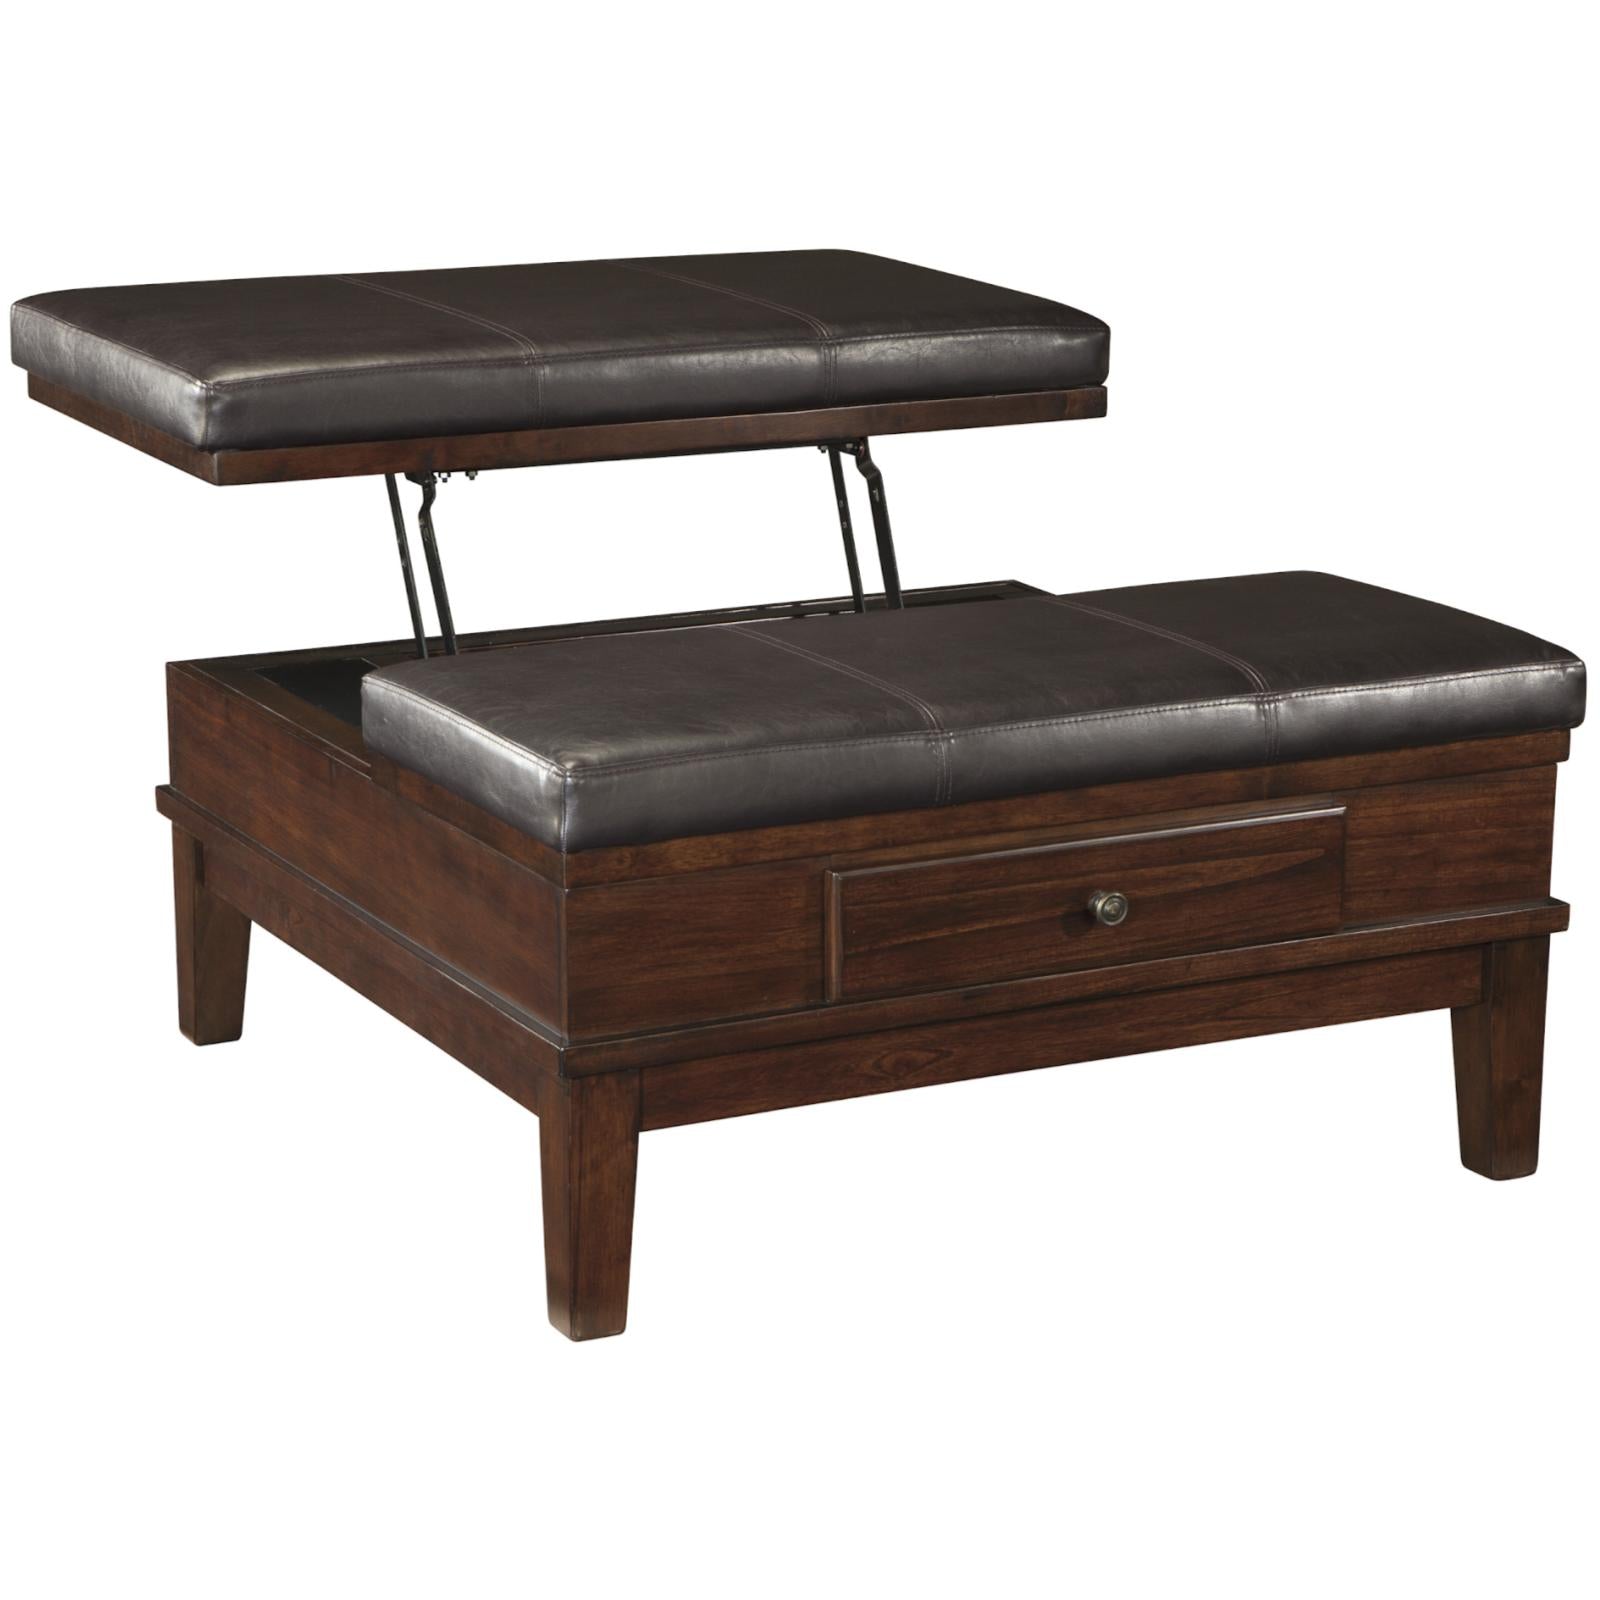 Gately Lift-Up Ottoman Cocktail Table, Occasional Tables, Ashley Furniture - Adams Furniture